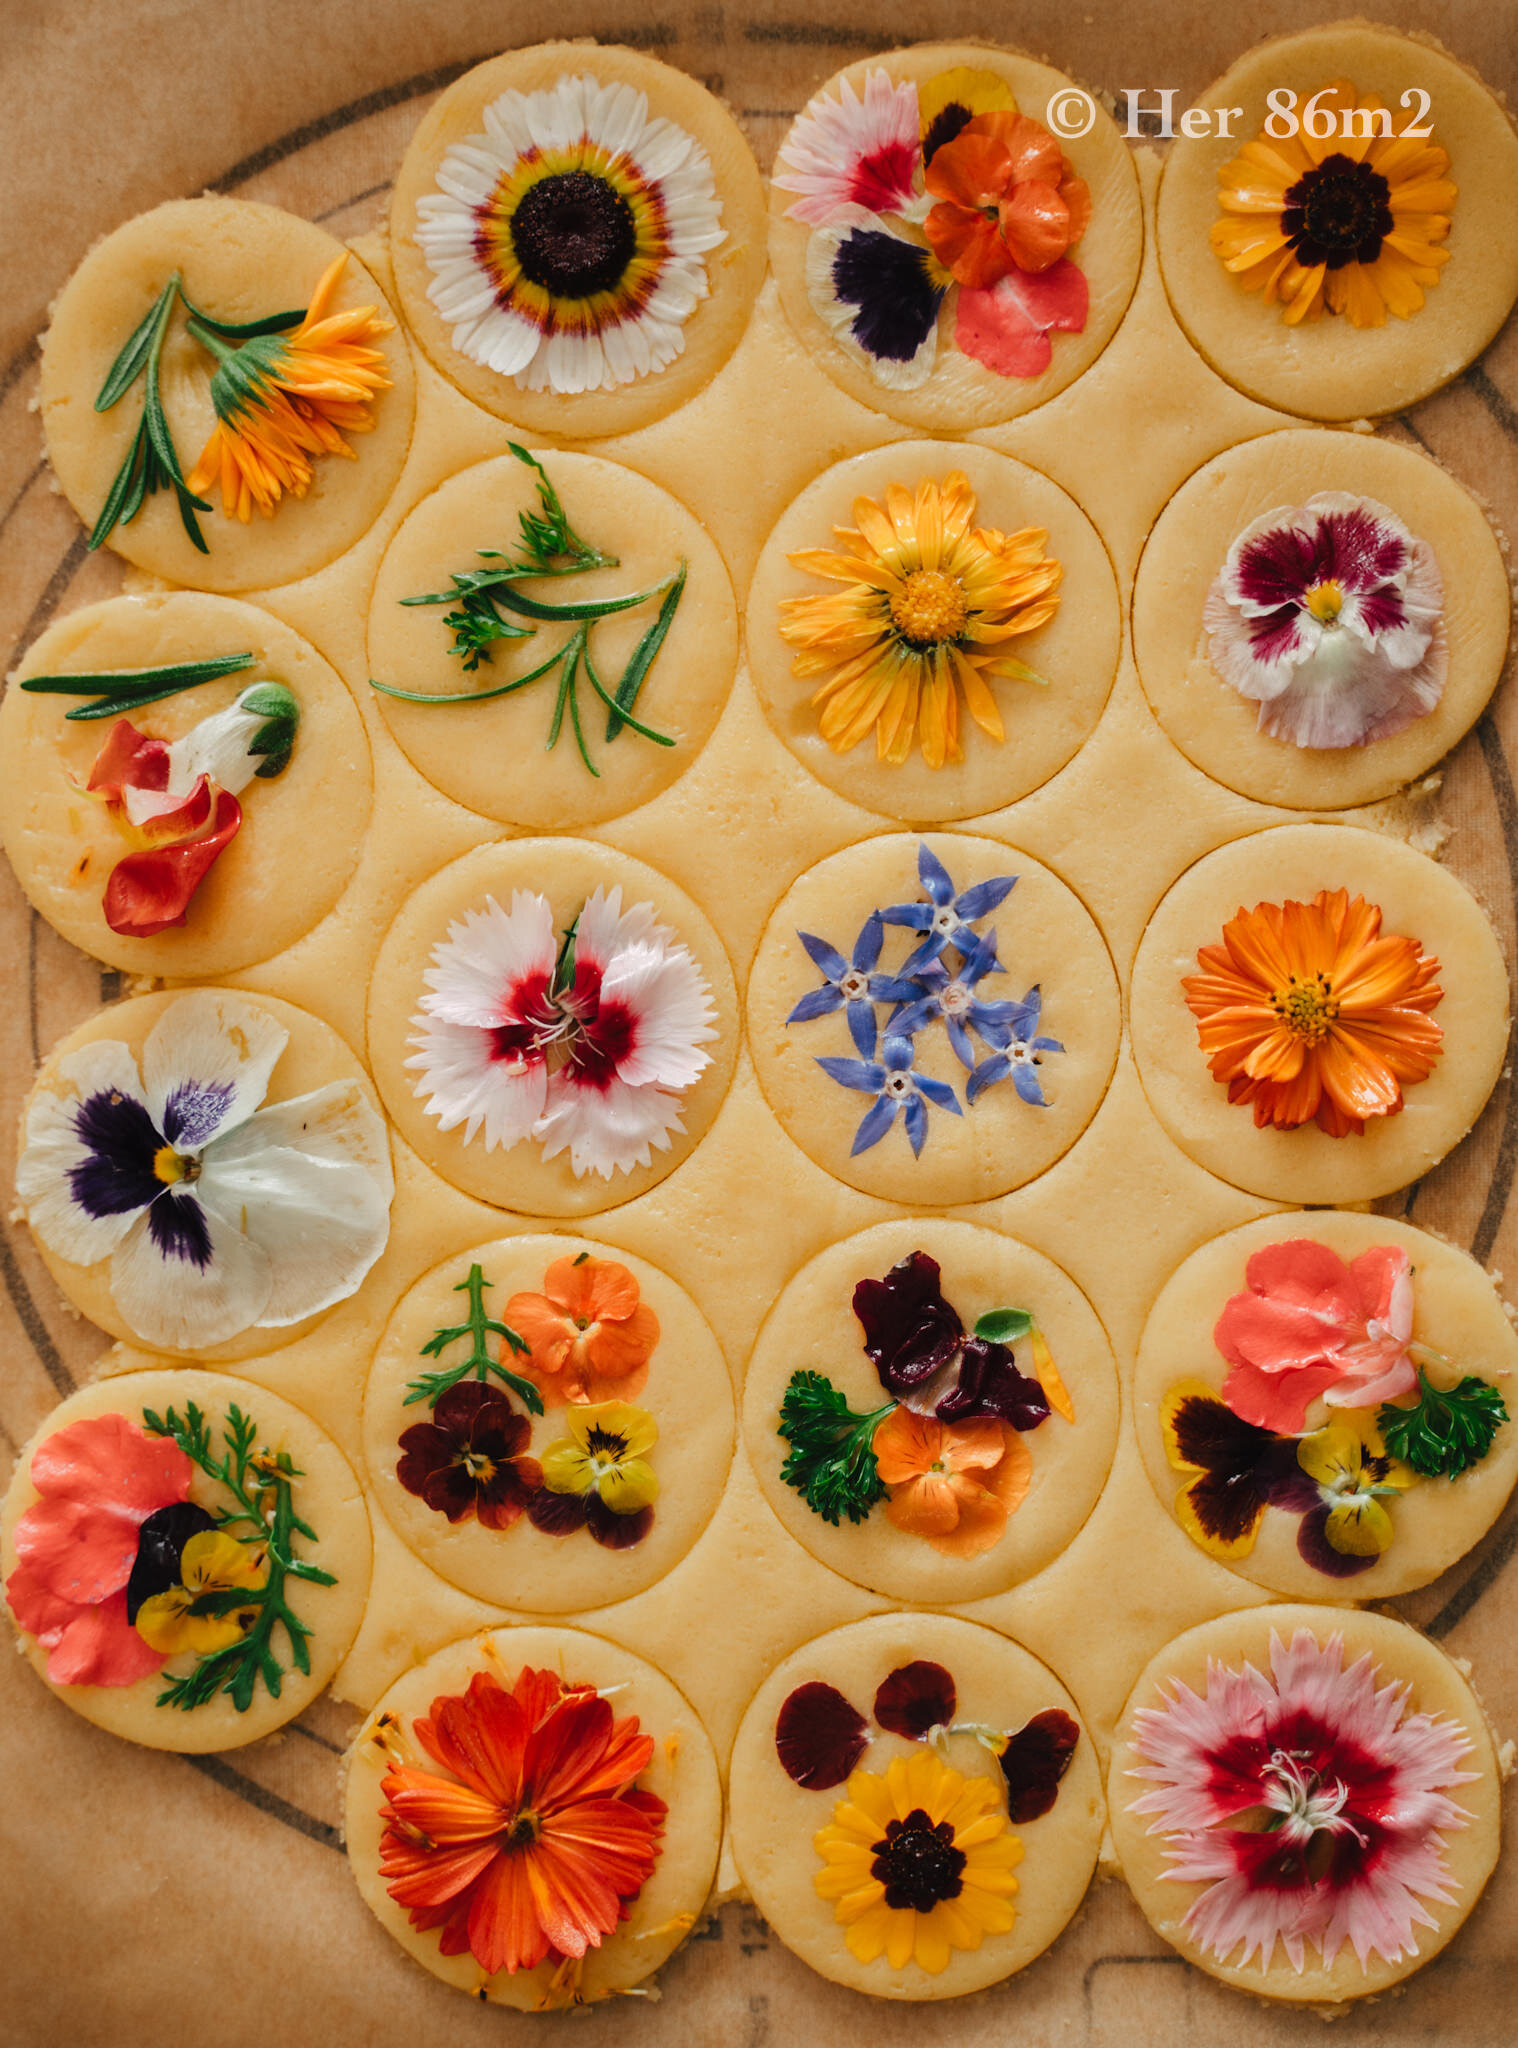 Edible Flowers Her 86m2 by Thuy Dao 10.JPG